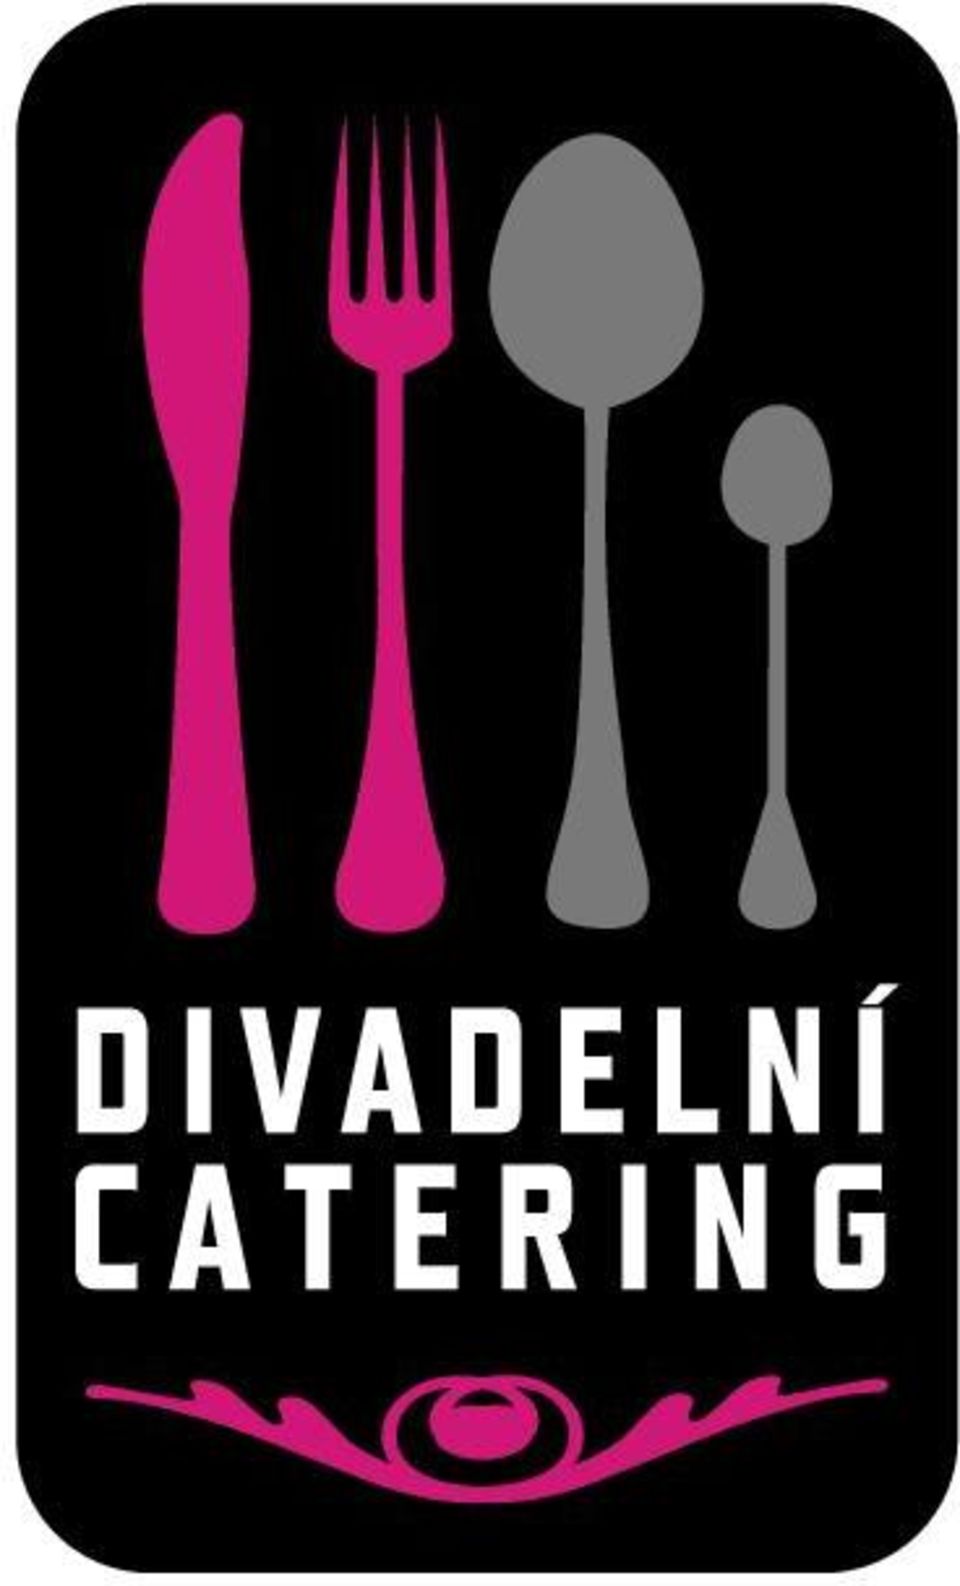 .. Divadelní catering s.r.o.